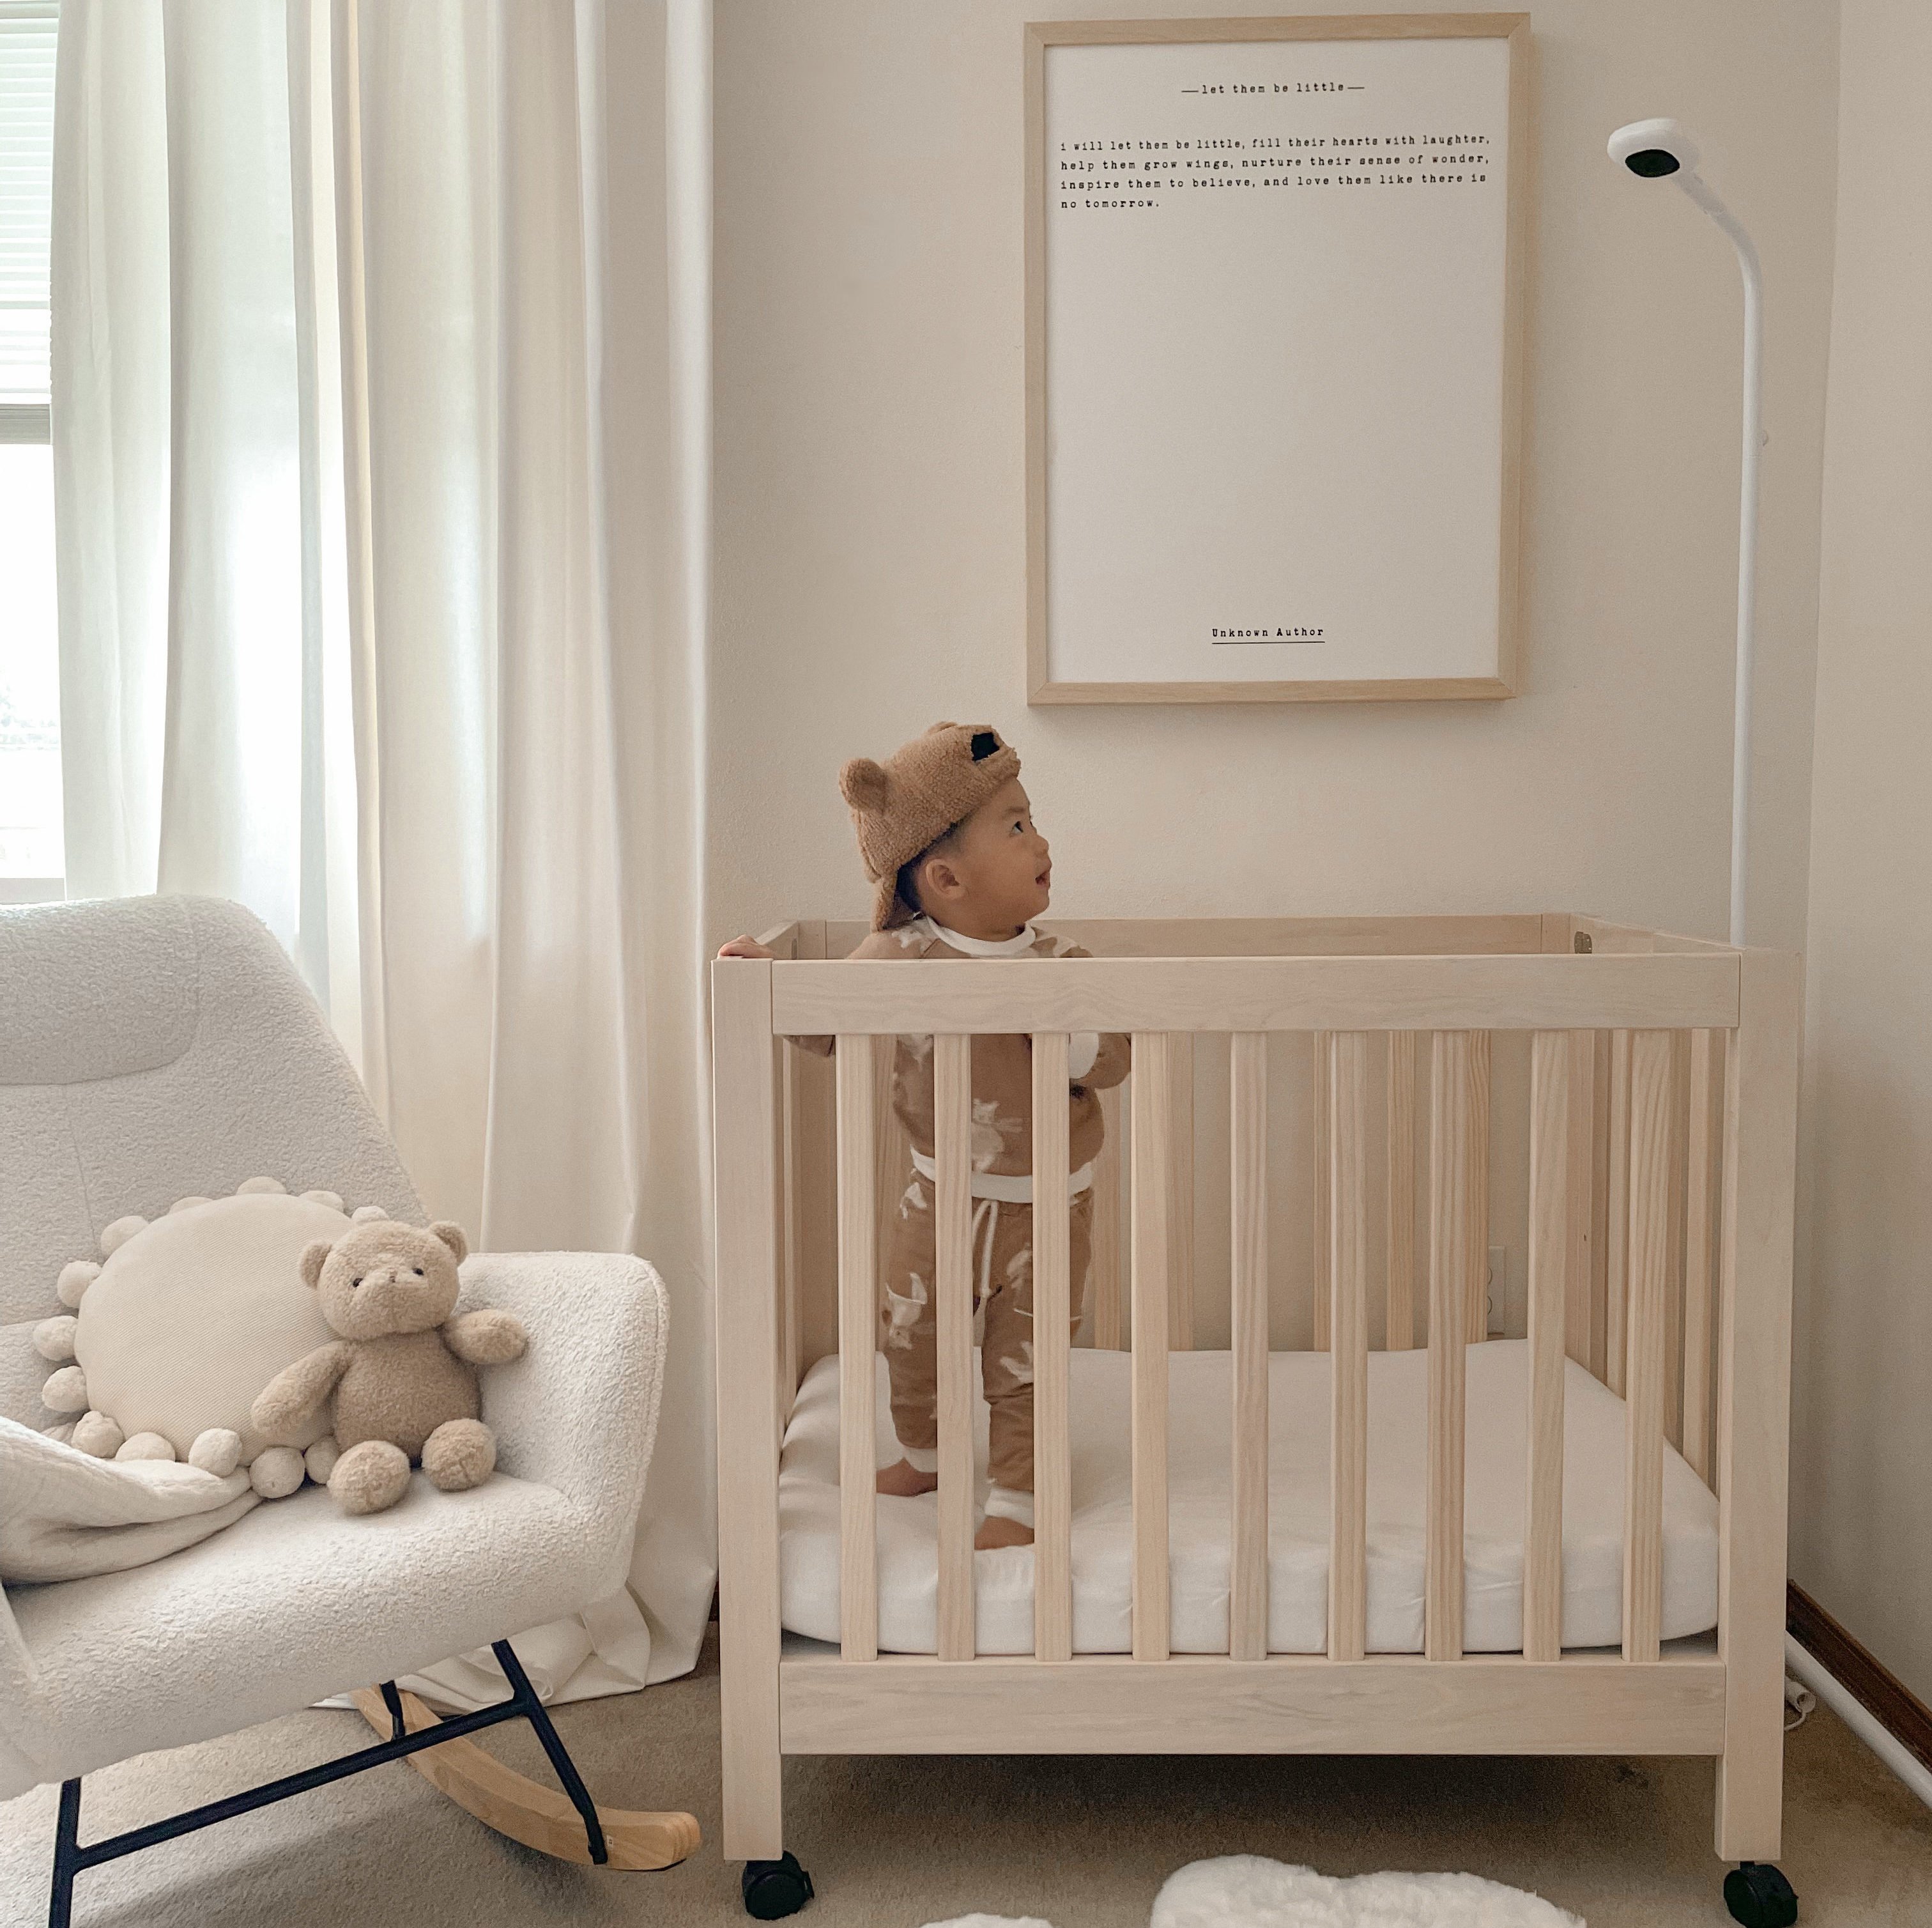 Nanit vs. The Other Baby Monitors: Get My Favorite Baby Buy